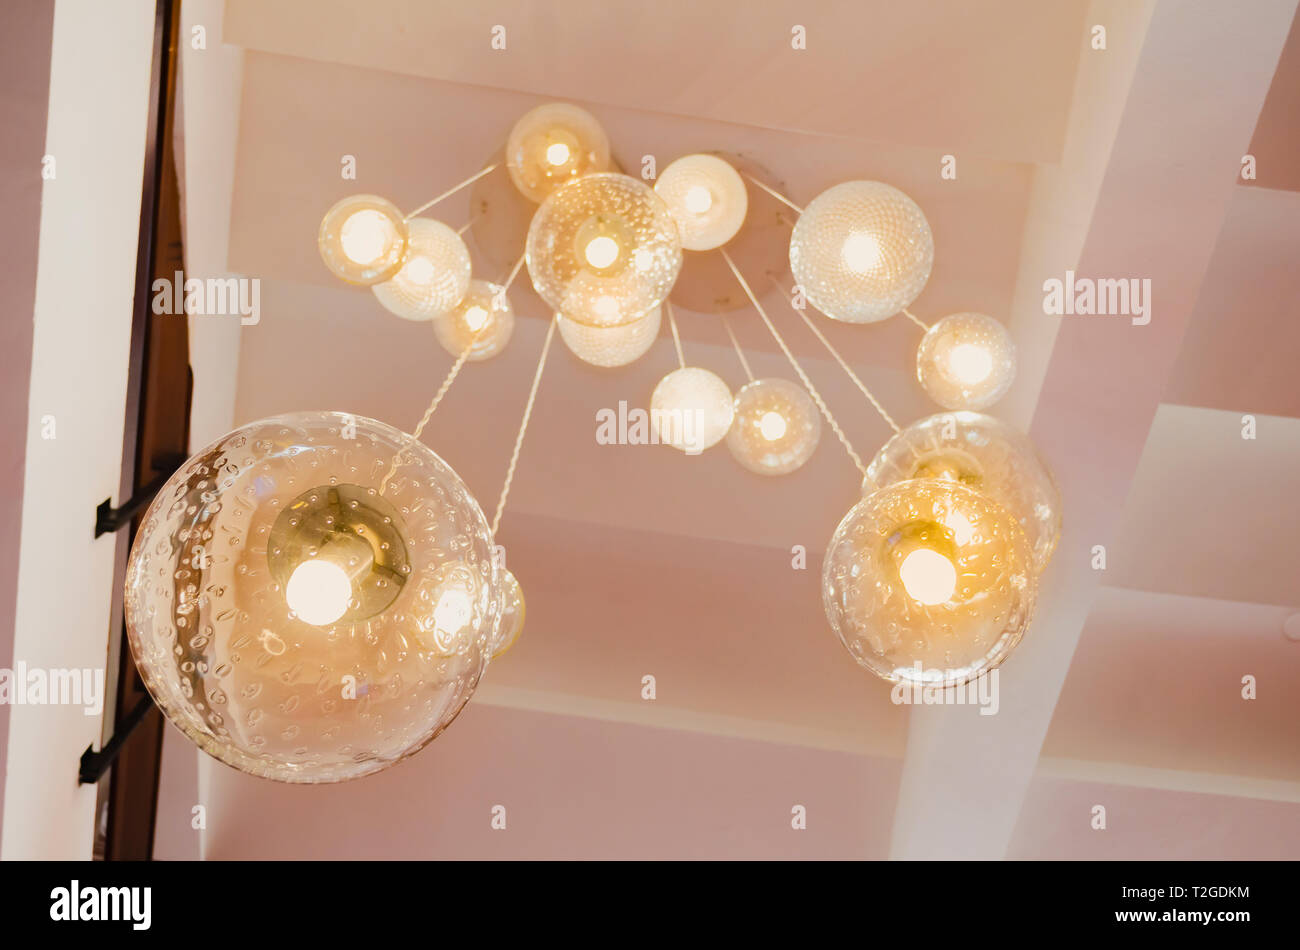 Ceiling Pendant Lamp With Beautiful Warm Lights Decorating Theater